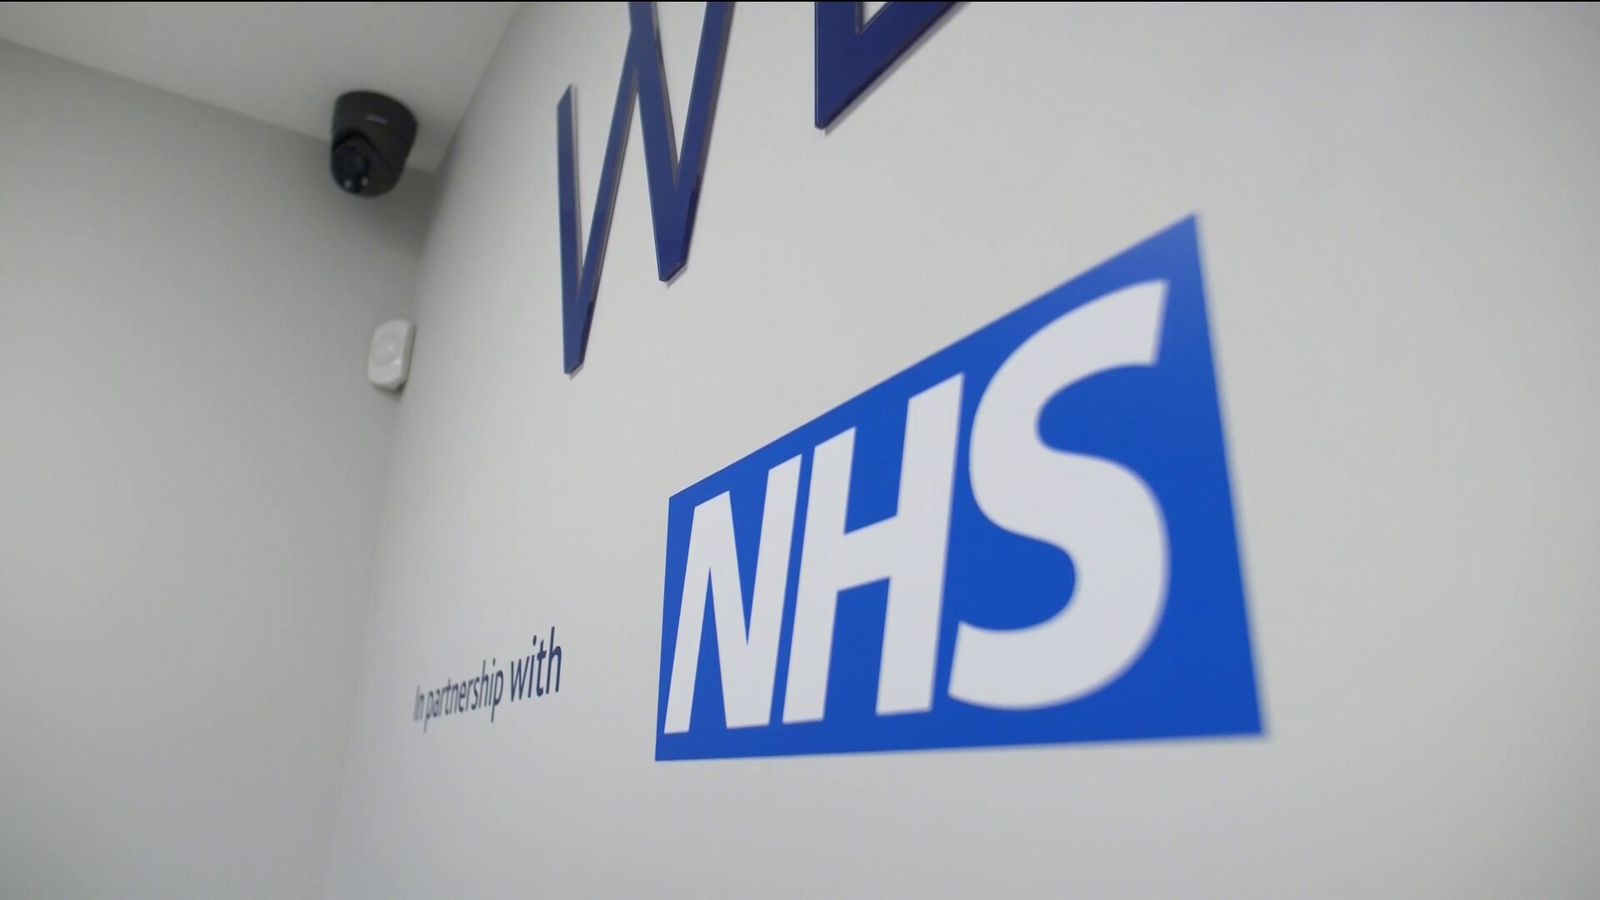 NHS to receive extra £200m ahead of winter amid record waiting lists